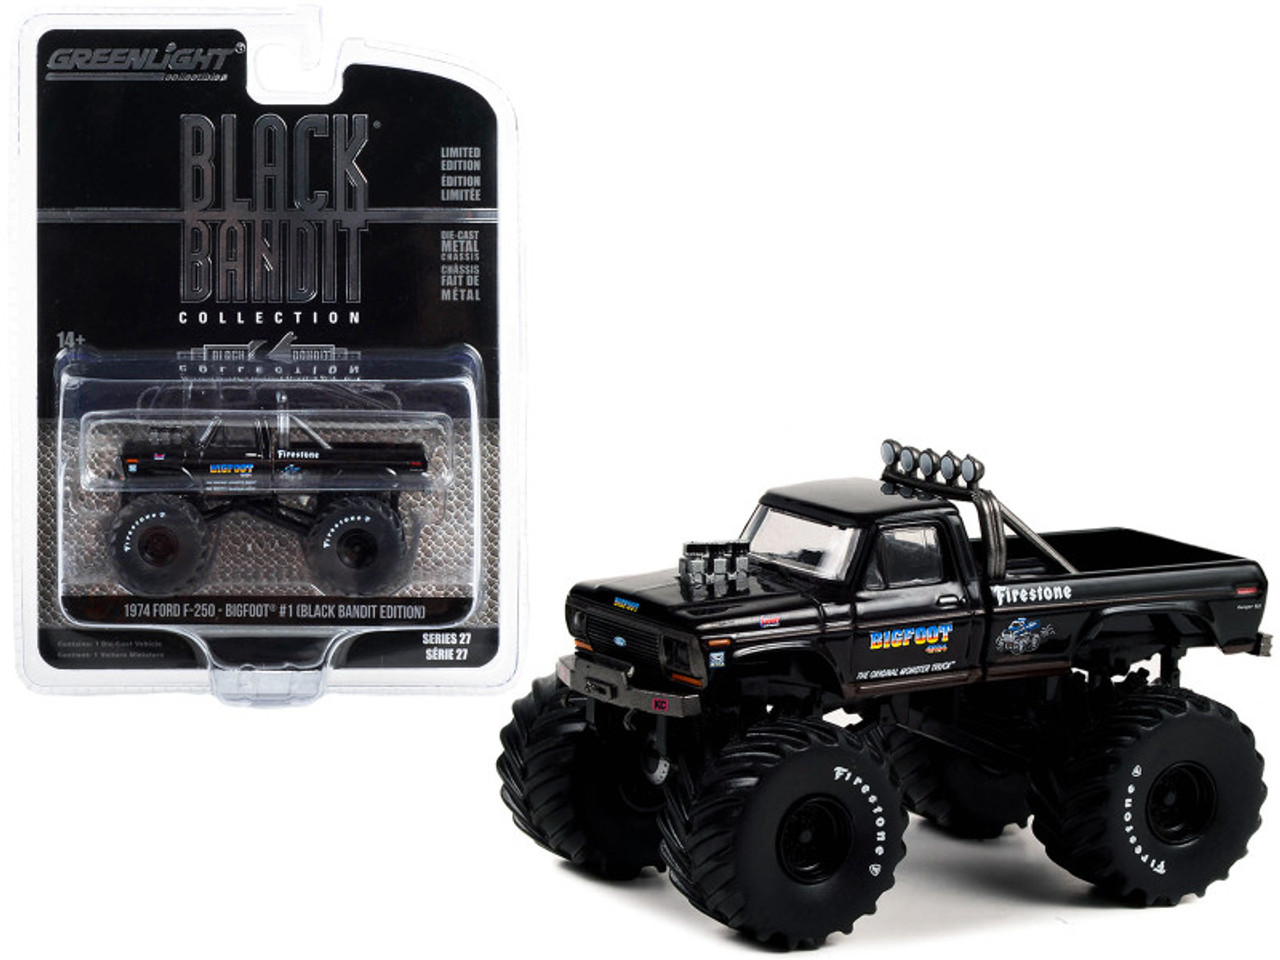 1974 Ford F-250 Monster Truck with 66-Inch Tires "Bigfoot #1 Black Bandit Edition" "Black Bandit" Series 27 1/64 Diecast Model Car by Greenlight